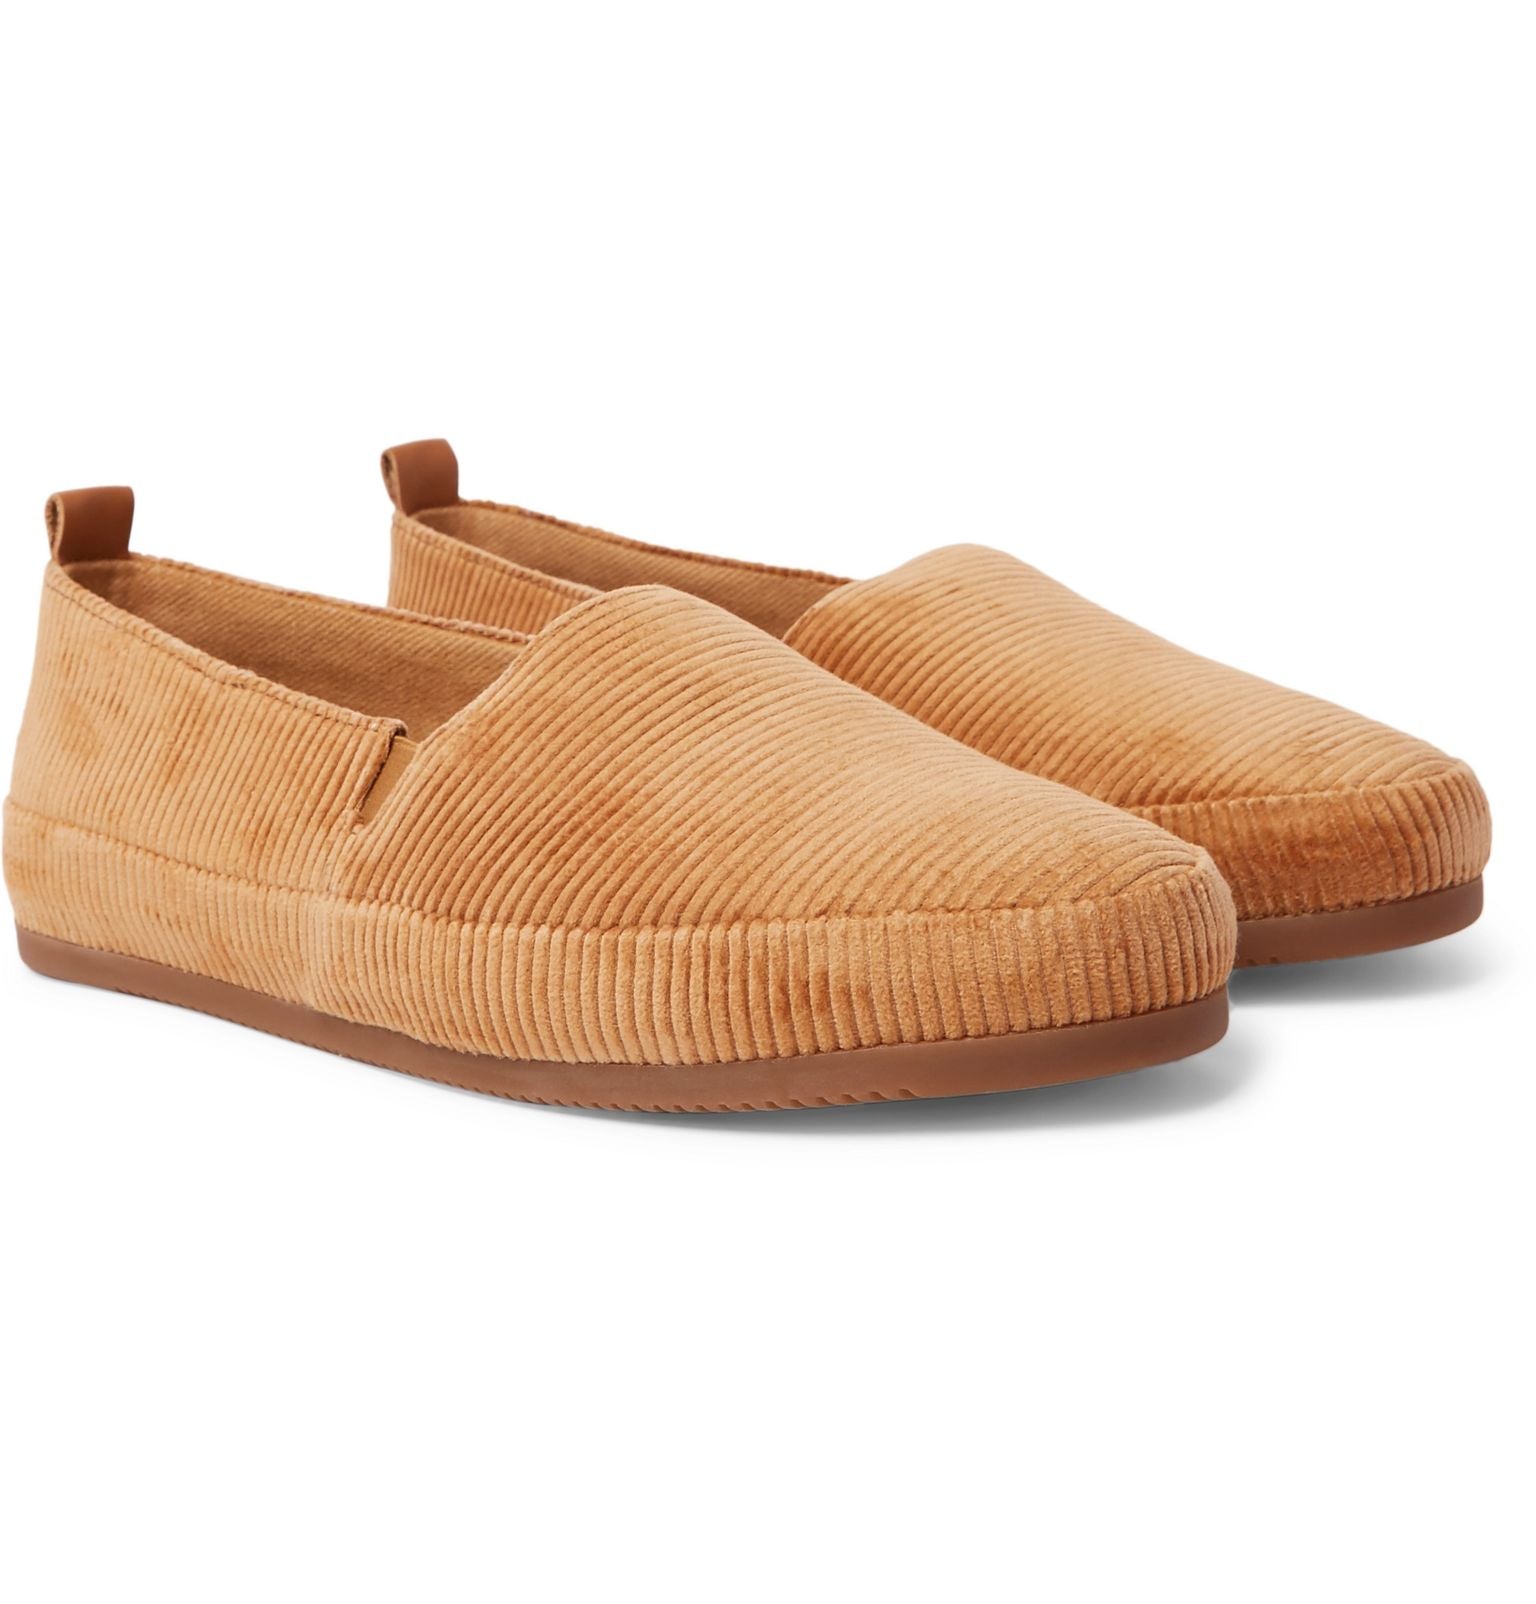 Mulo Brown Shearling-Lined Corduroy Slippers